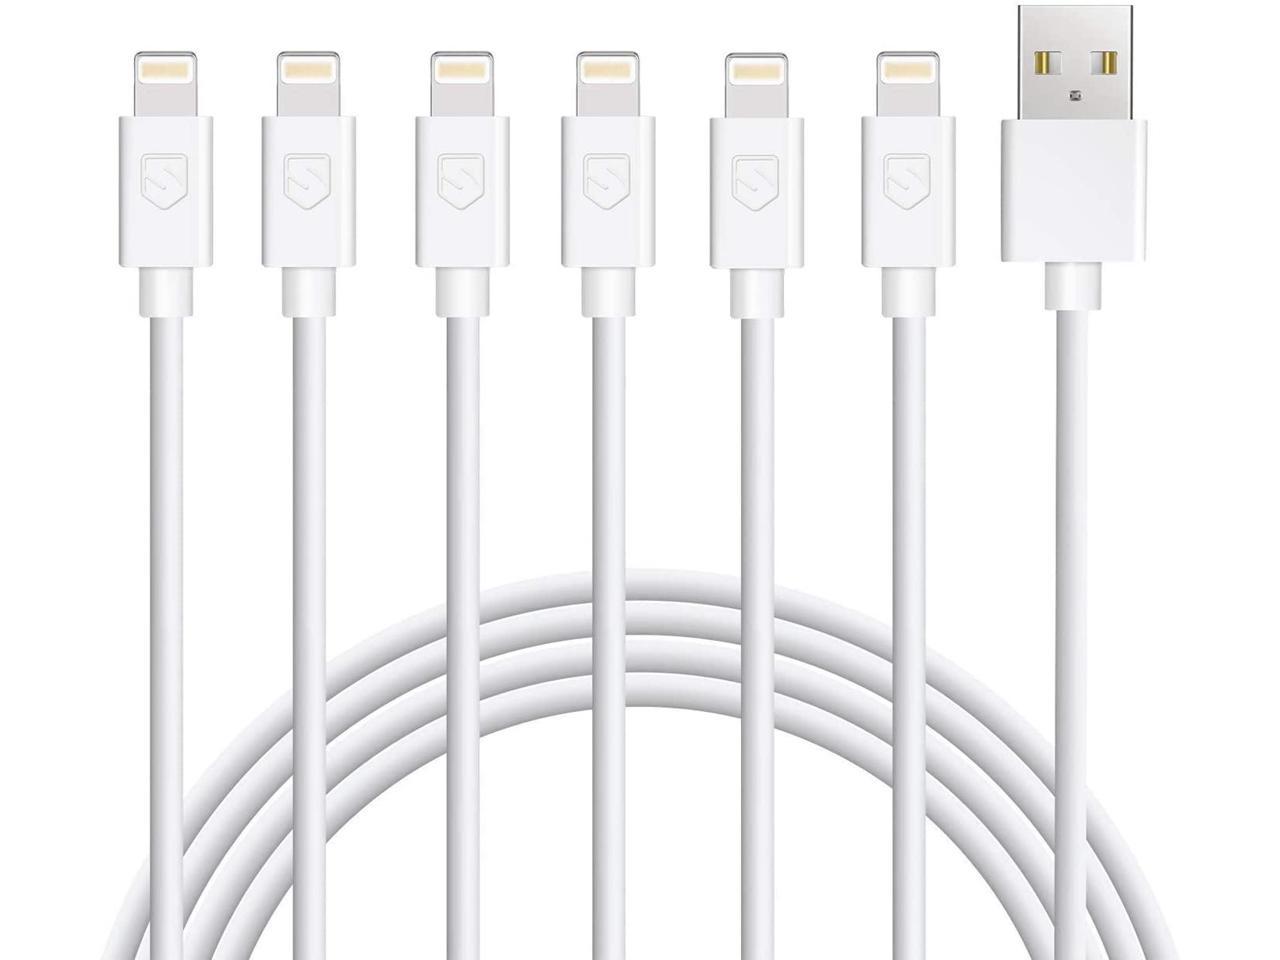 6ft iPhone Charger Cable 5Pack,SMALLElectric Lightning Cable 6ft iPhone Cord 6 Foot Compatible with iPhone X/8/8 Plus/7/7 Plus/6/6s Plus/5s/5 Red 